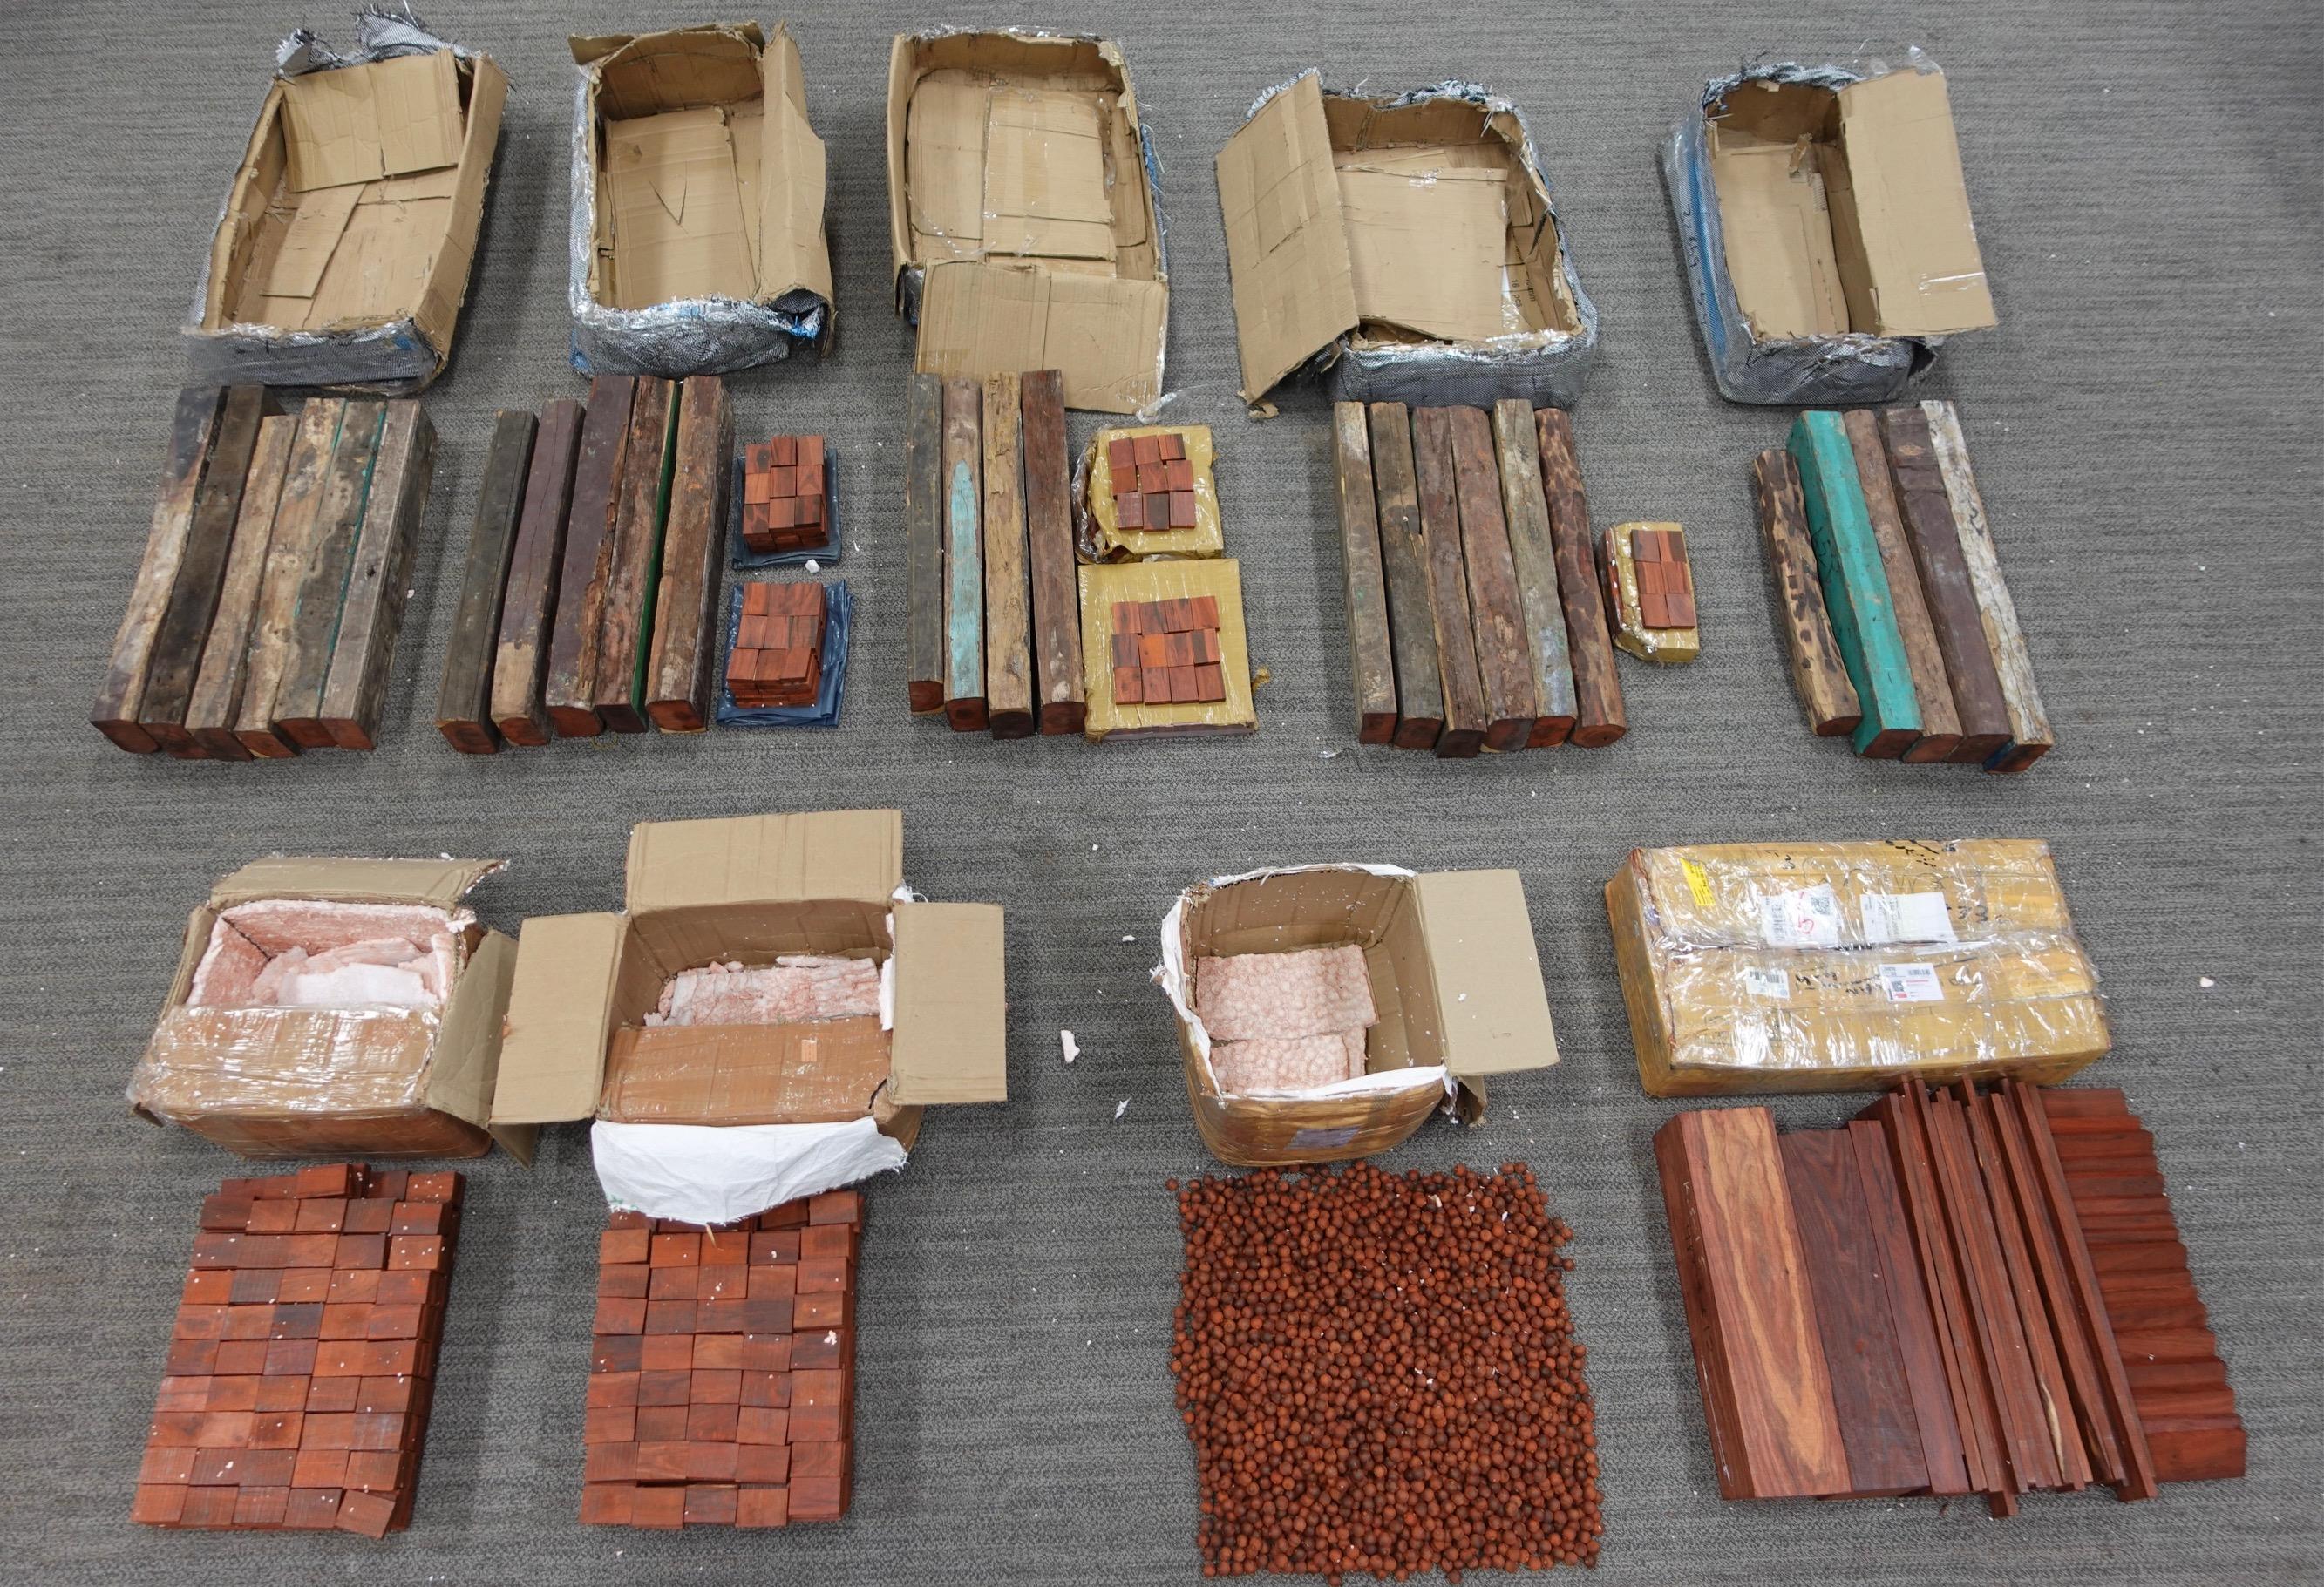 Hong Kong Customs on May 16 and yesterday (May 22) seized a total of about 192 kilograms of suspected scheduled red sandalwood, with an estimated market value of about $1 million, at Hong Kong International Airport and in Sheung Shui. Photo shows the suspected scheduled red sandalwood seized.